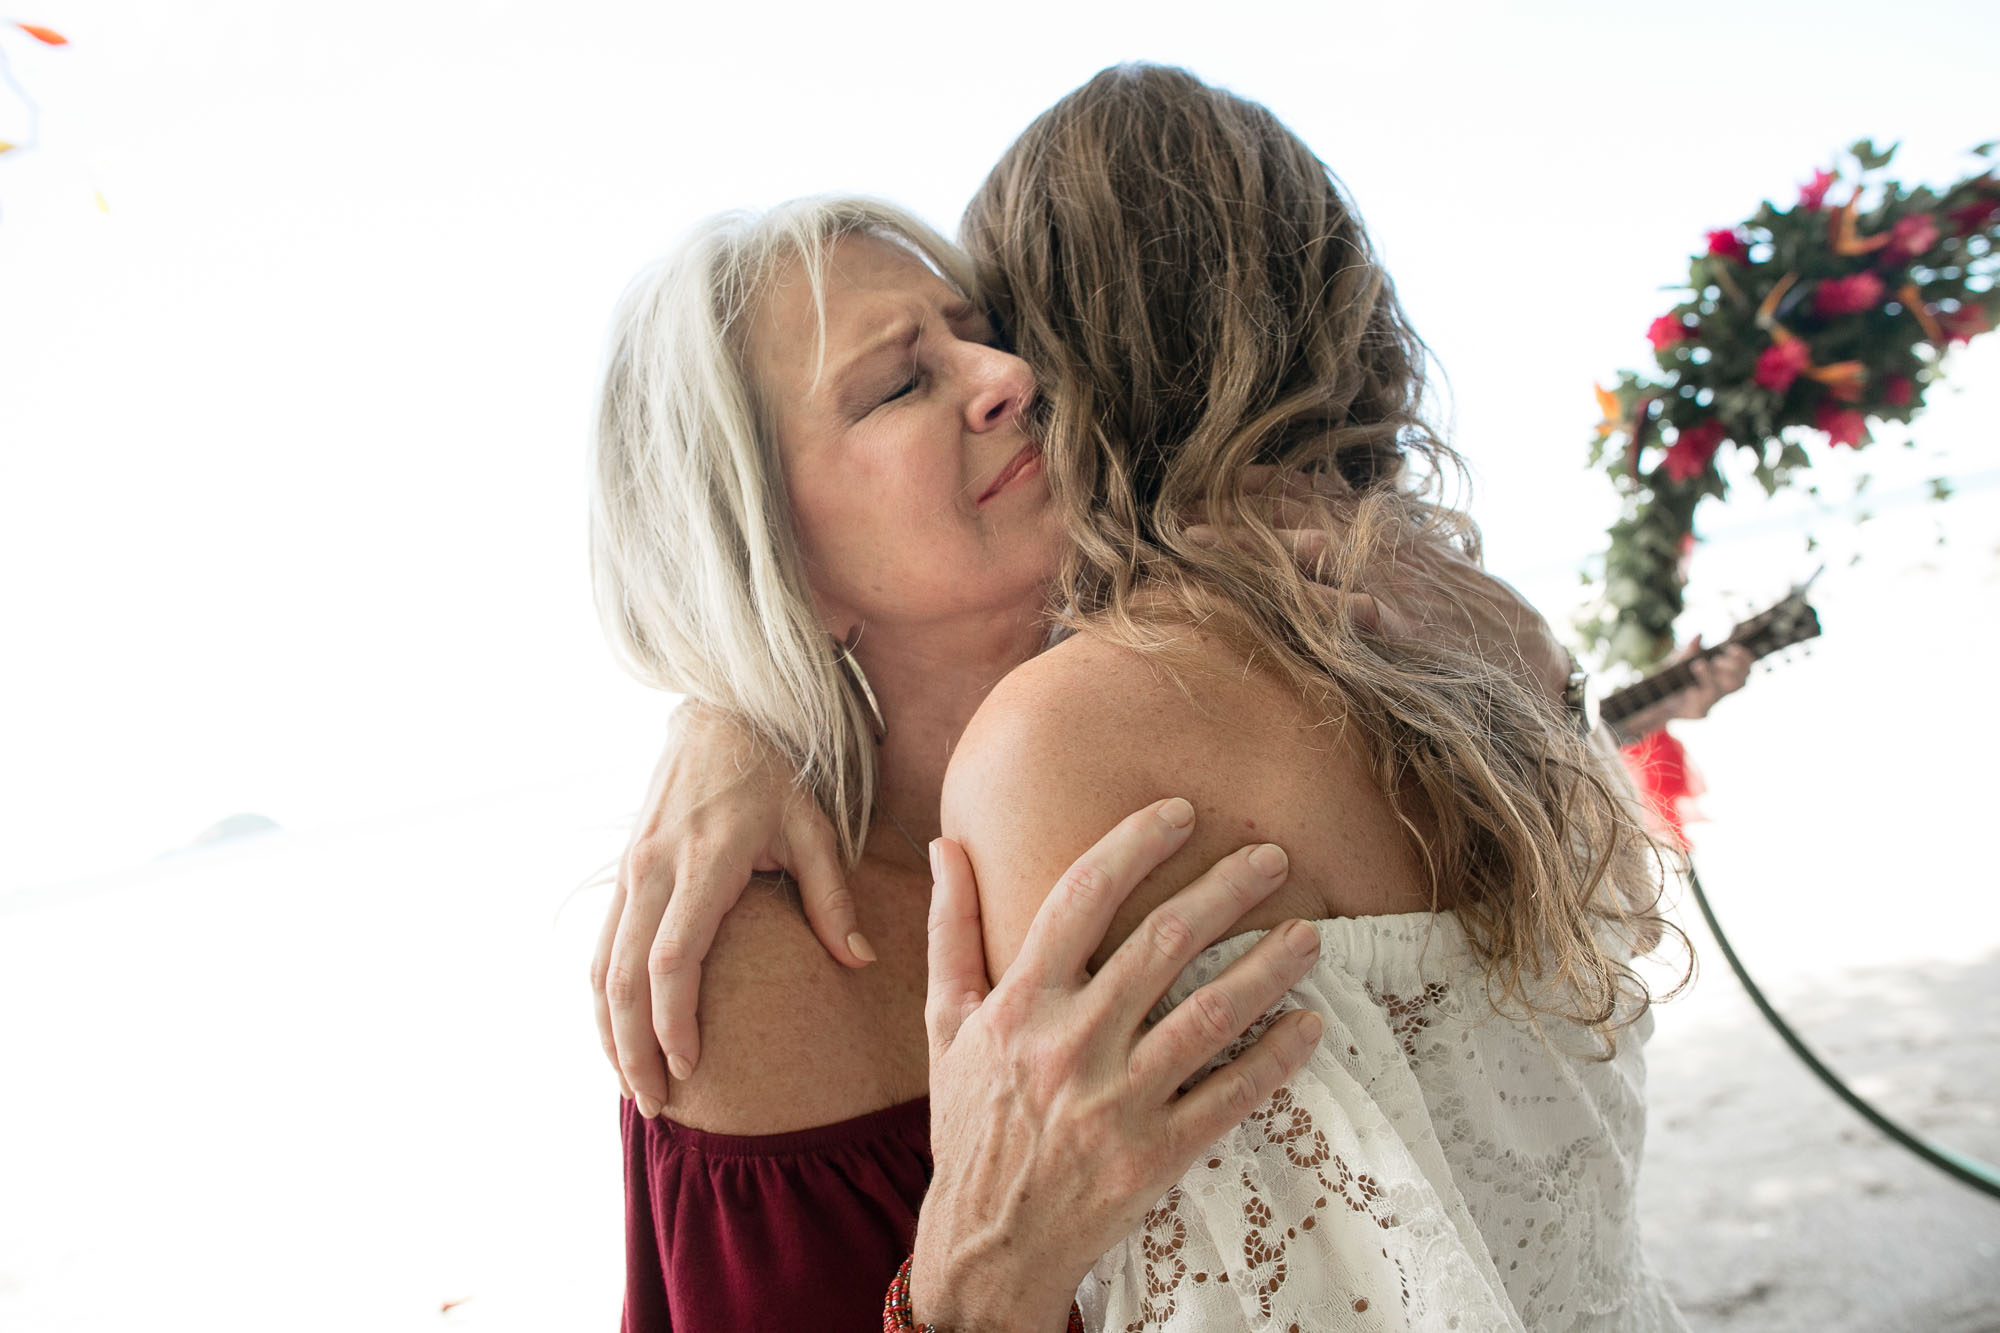 Sharon shares a special hug with her mom